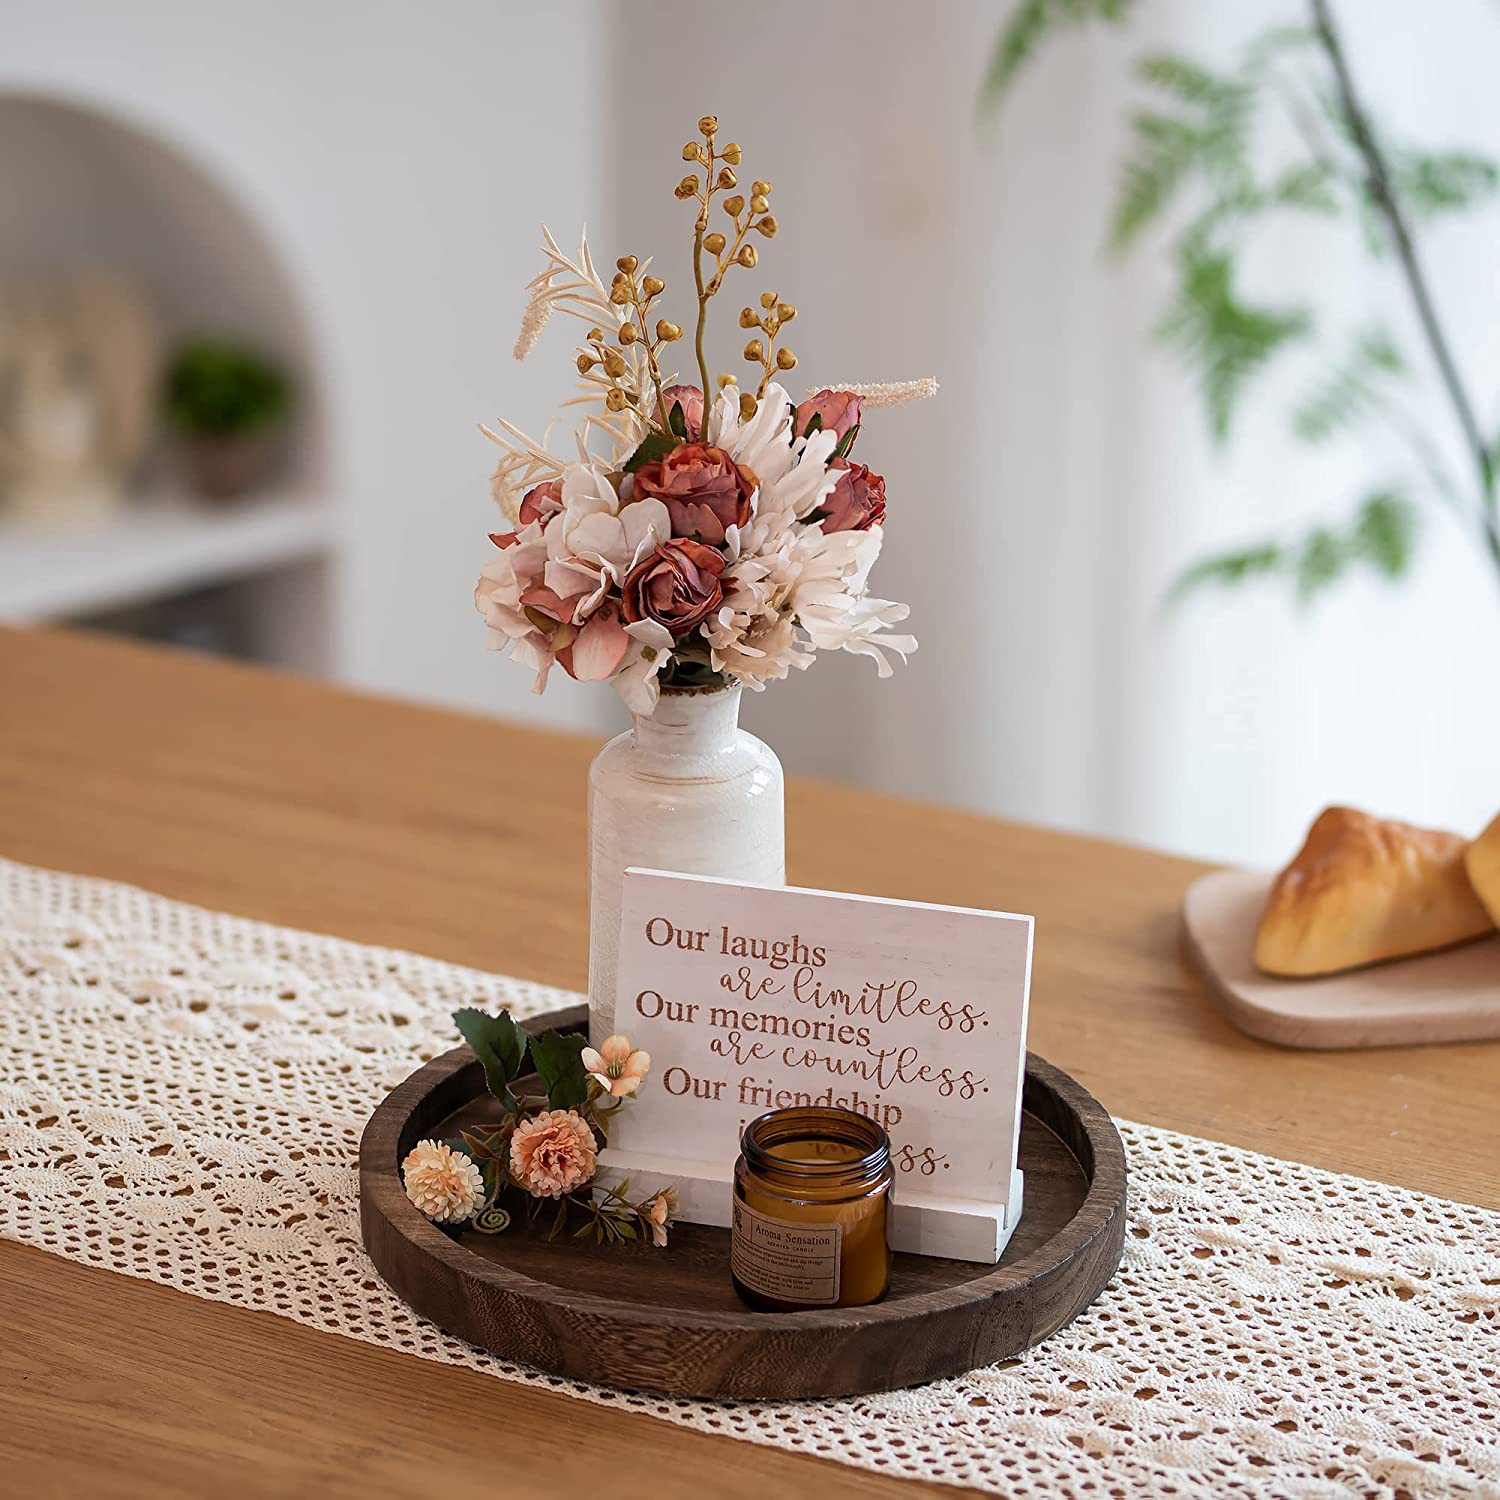 Living Room Sunflower Seeds Nut Wooden Storage Tray Household Solid Wood Small Items Decorative Tray Display Wooden Candle Plate